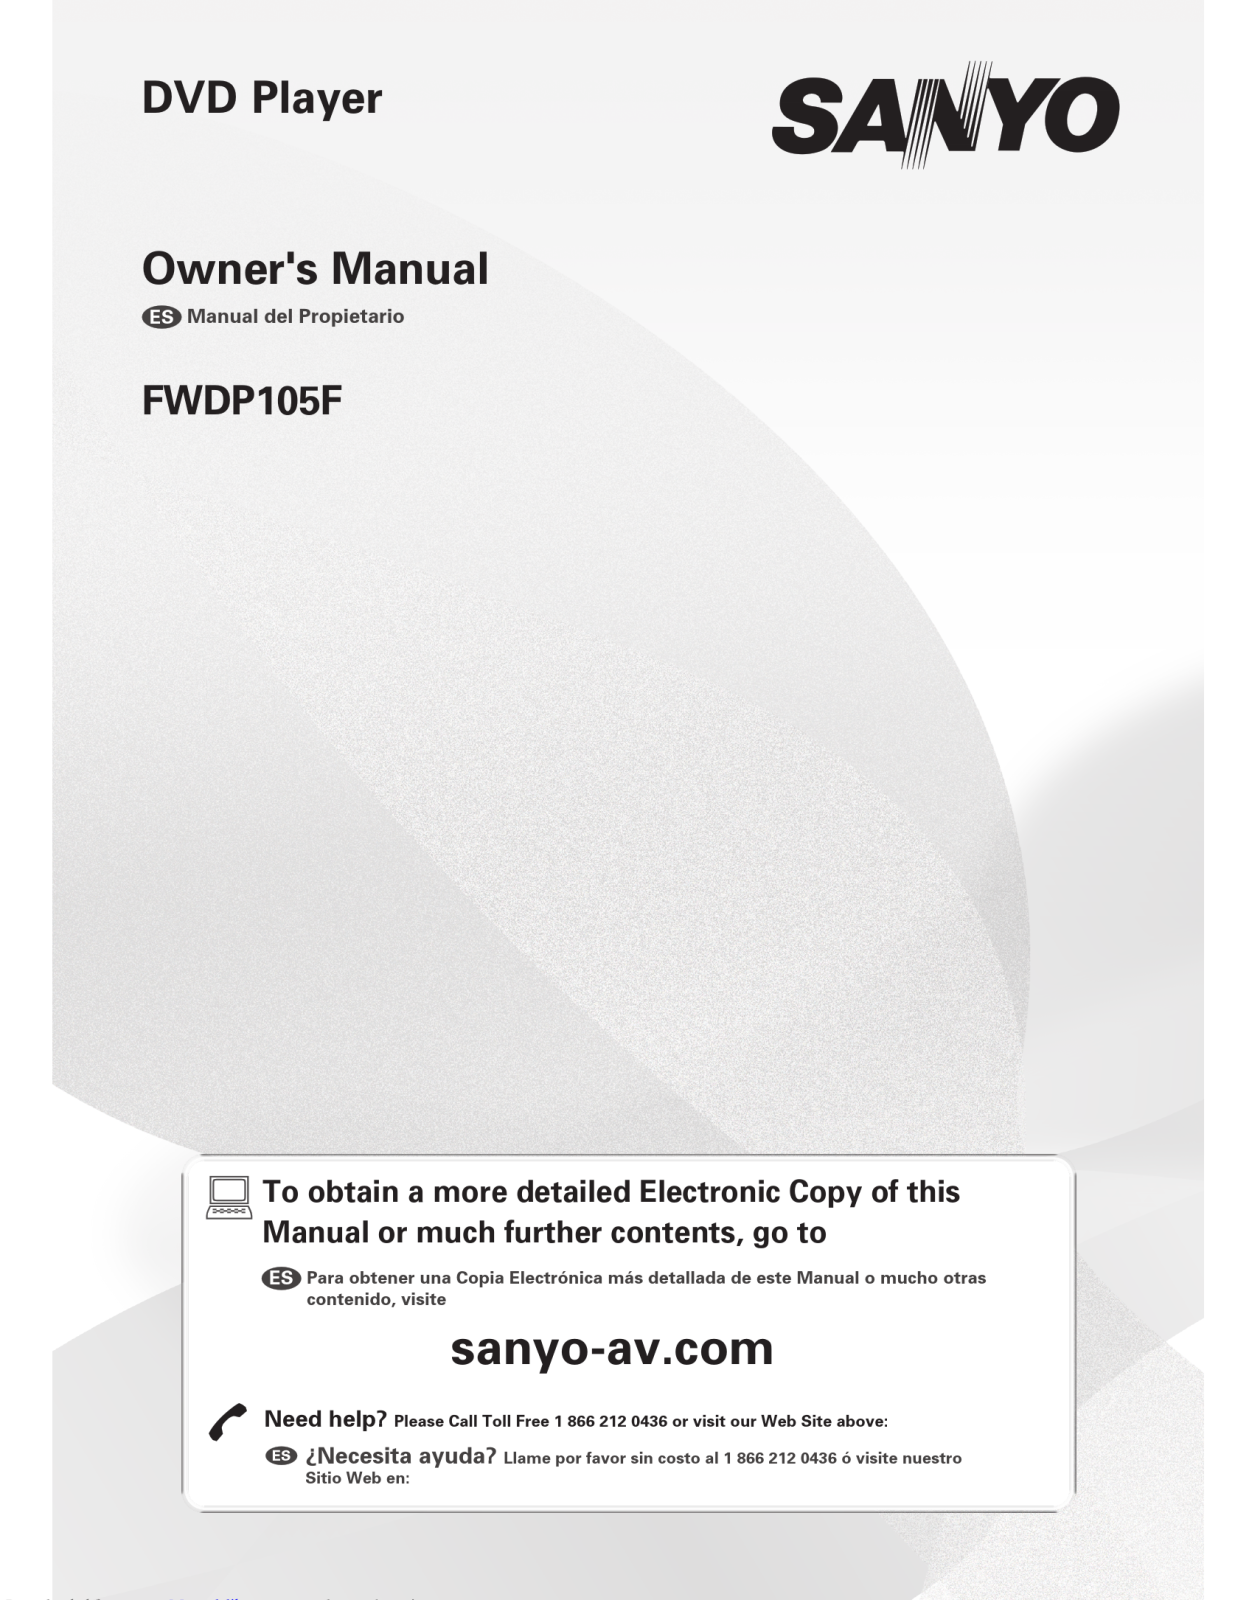 Sanyo FWDP105F Owner's Manual